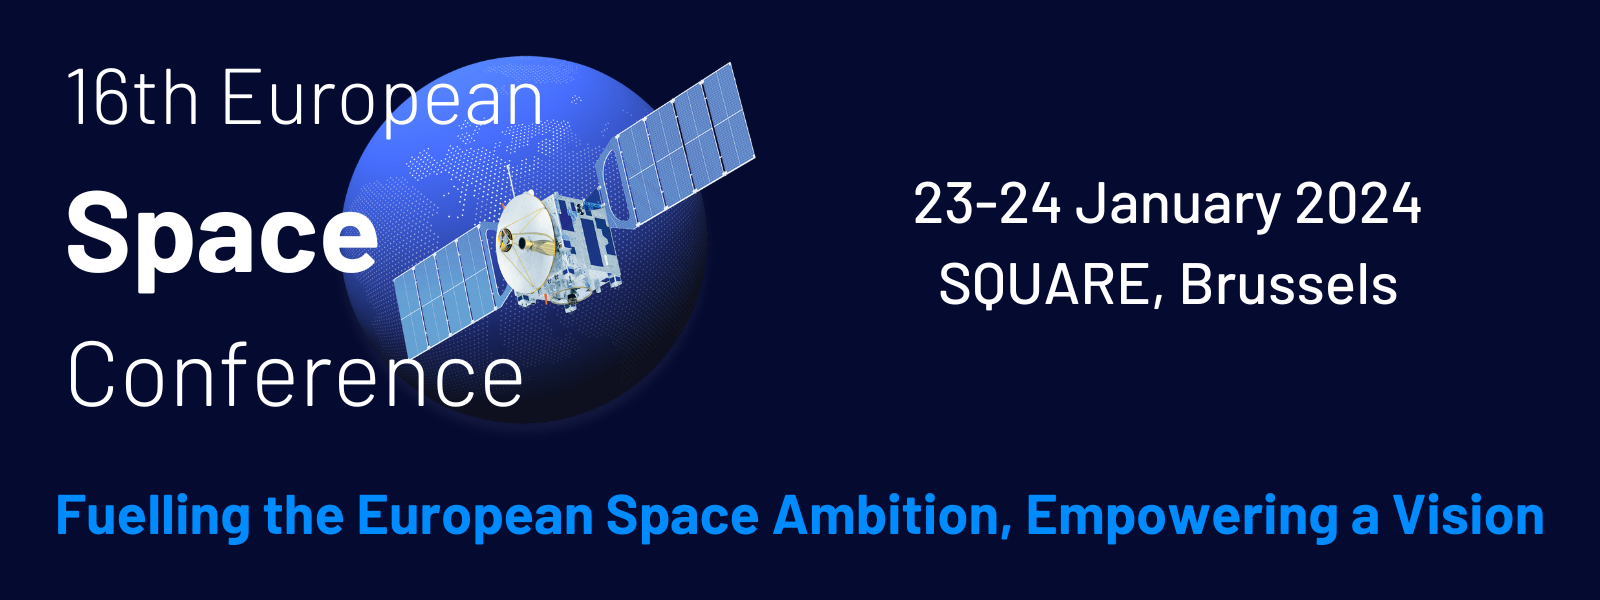 You are invited to the most influential space conference in Europe